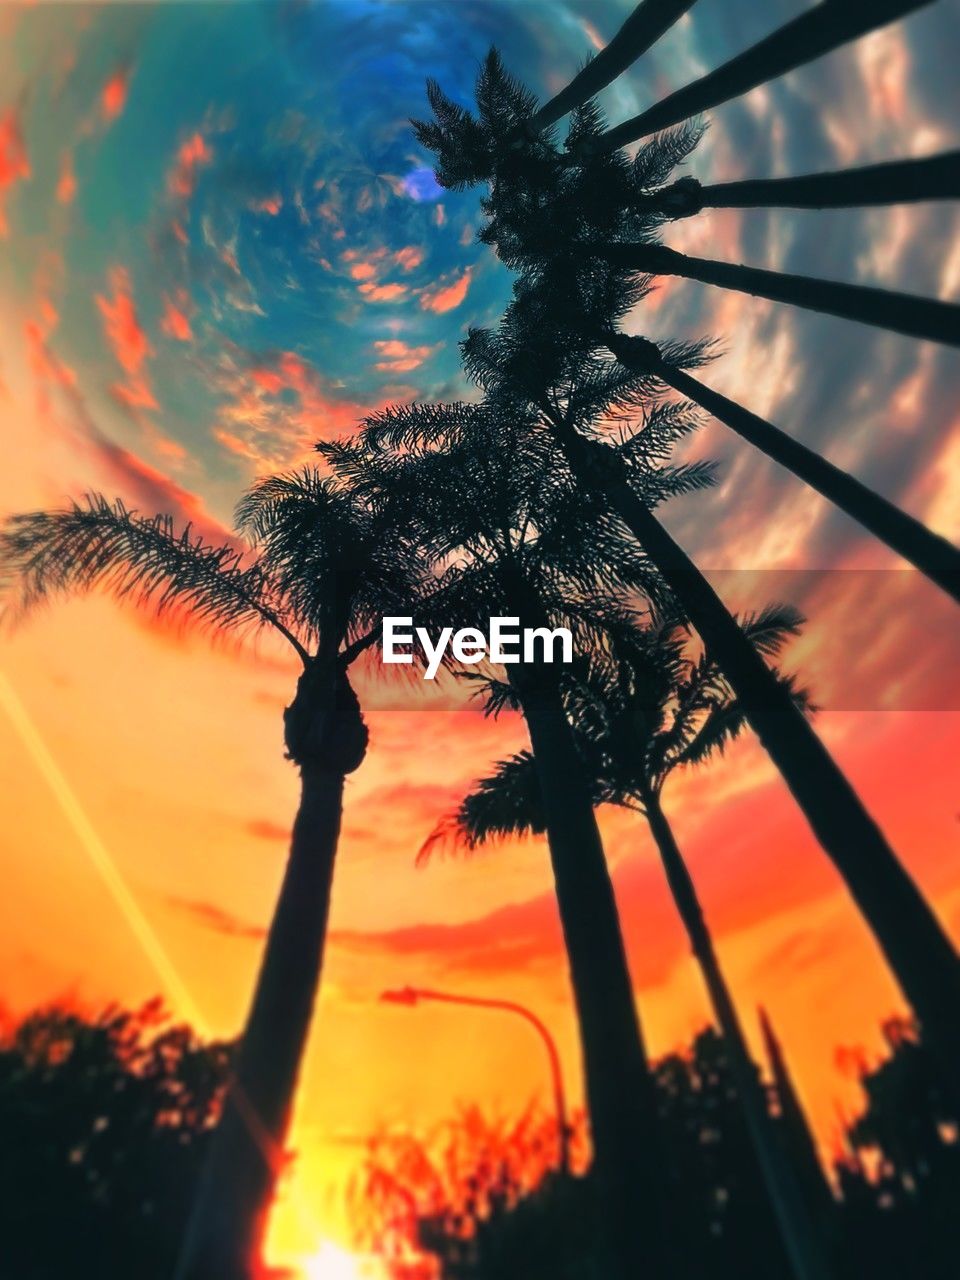 sky, sunset, tree, palm tree, nature, plant, silhouette, cloud, tropical climate, beauty in nature, orange color, no people, tranquility, sunlight, low angle view, outdoors, dramatic sky, scenics - nature, back lit, tranquil scene, land, sun, dusk, idyllic, flower, growth, environment